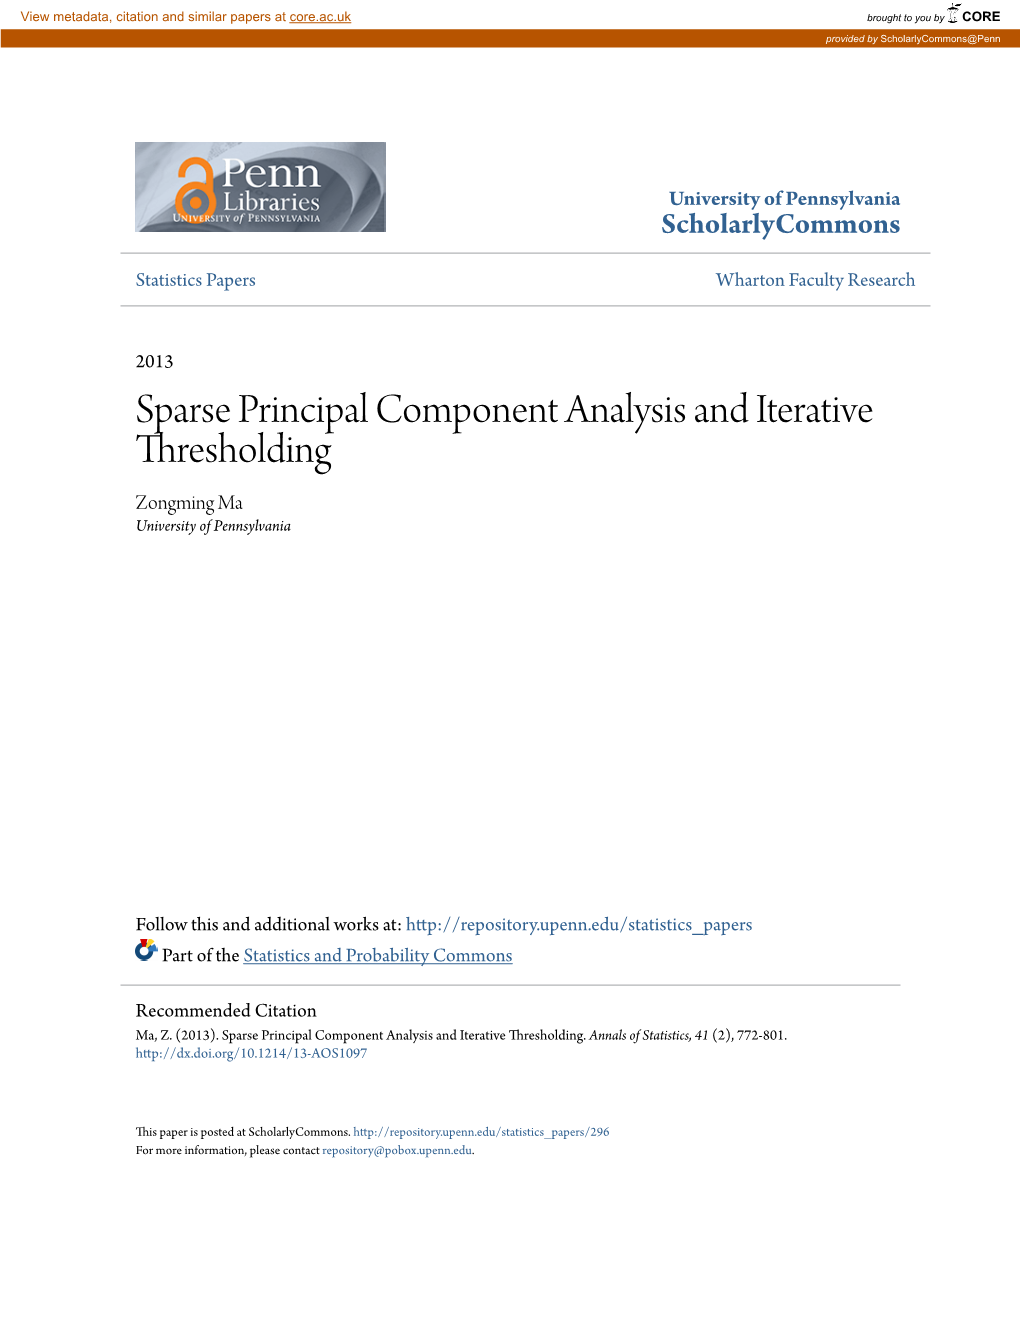 Sparse Principal Component Analysis and Iterative Thresholding Zongming Ma University of Pennsylvania